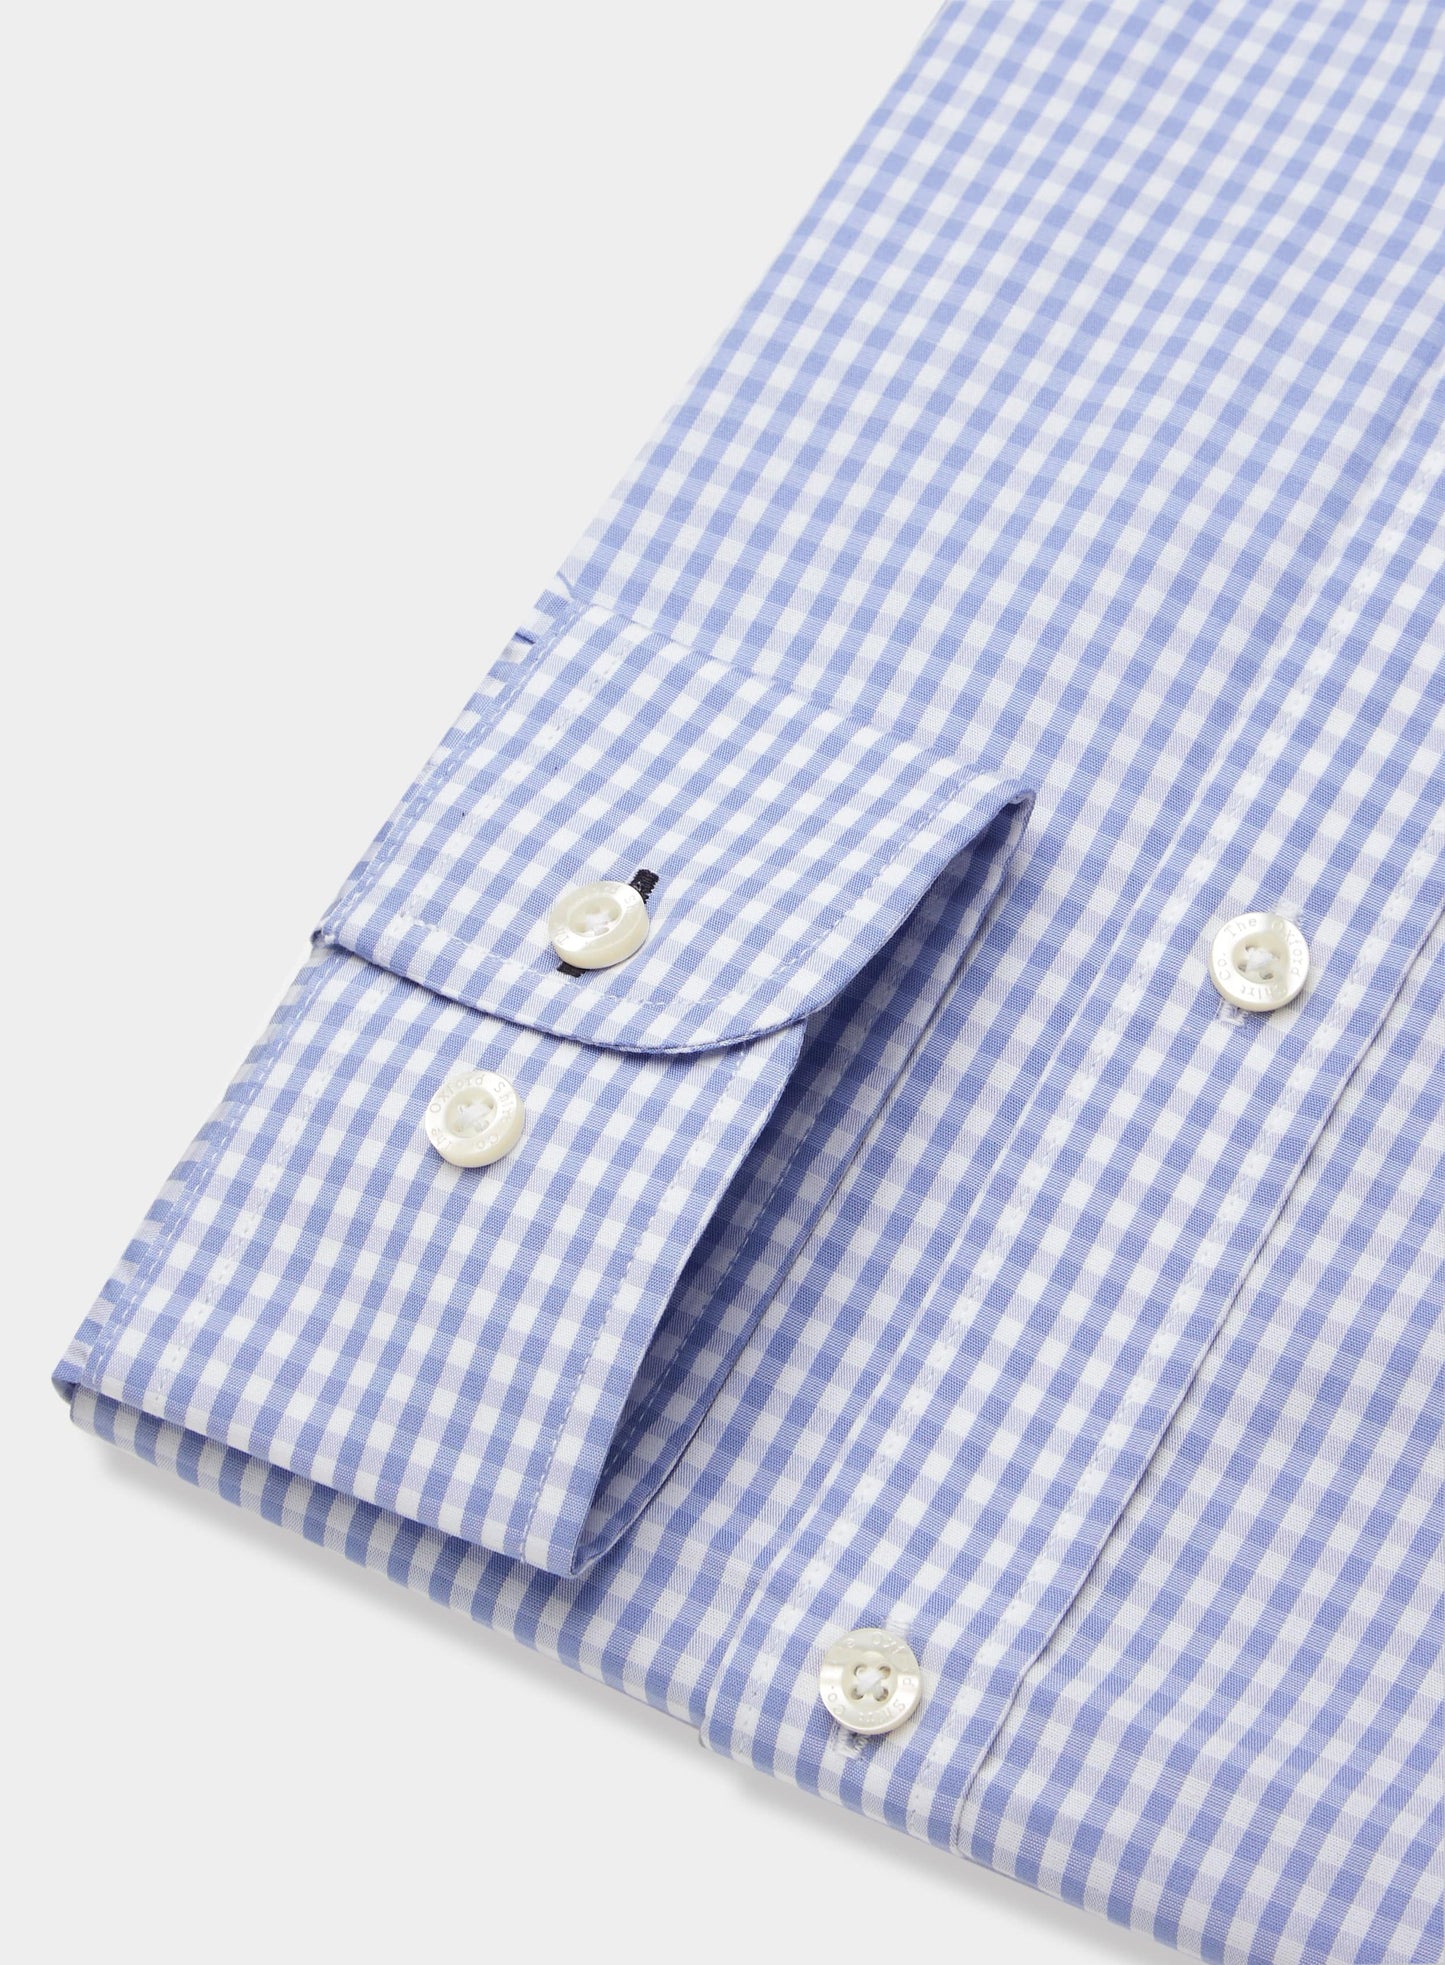 Mens Tailored Fit Shirt in Pale Blue Gingham - Oxford Shirt Co.